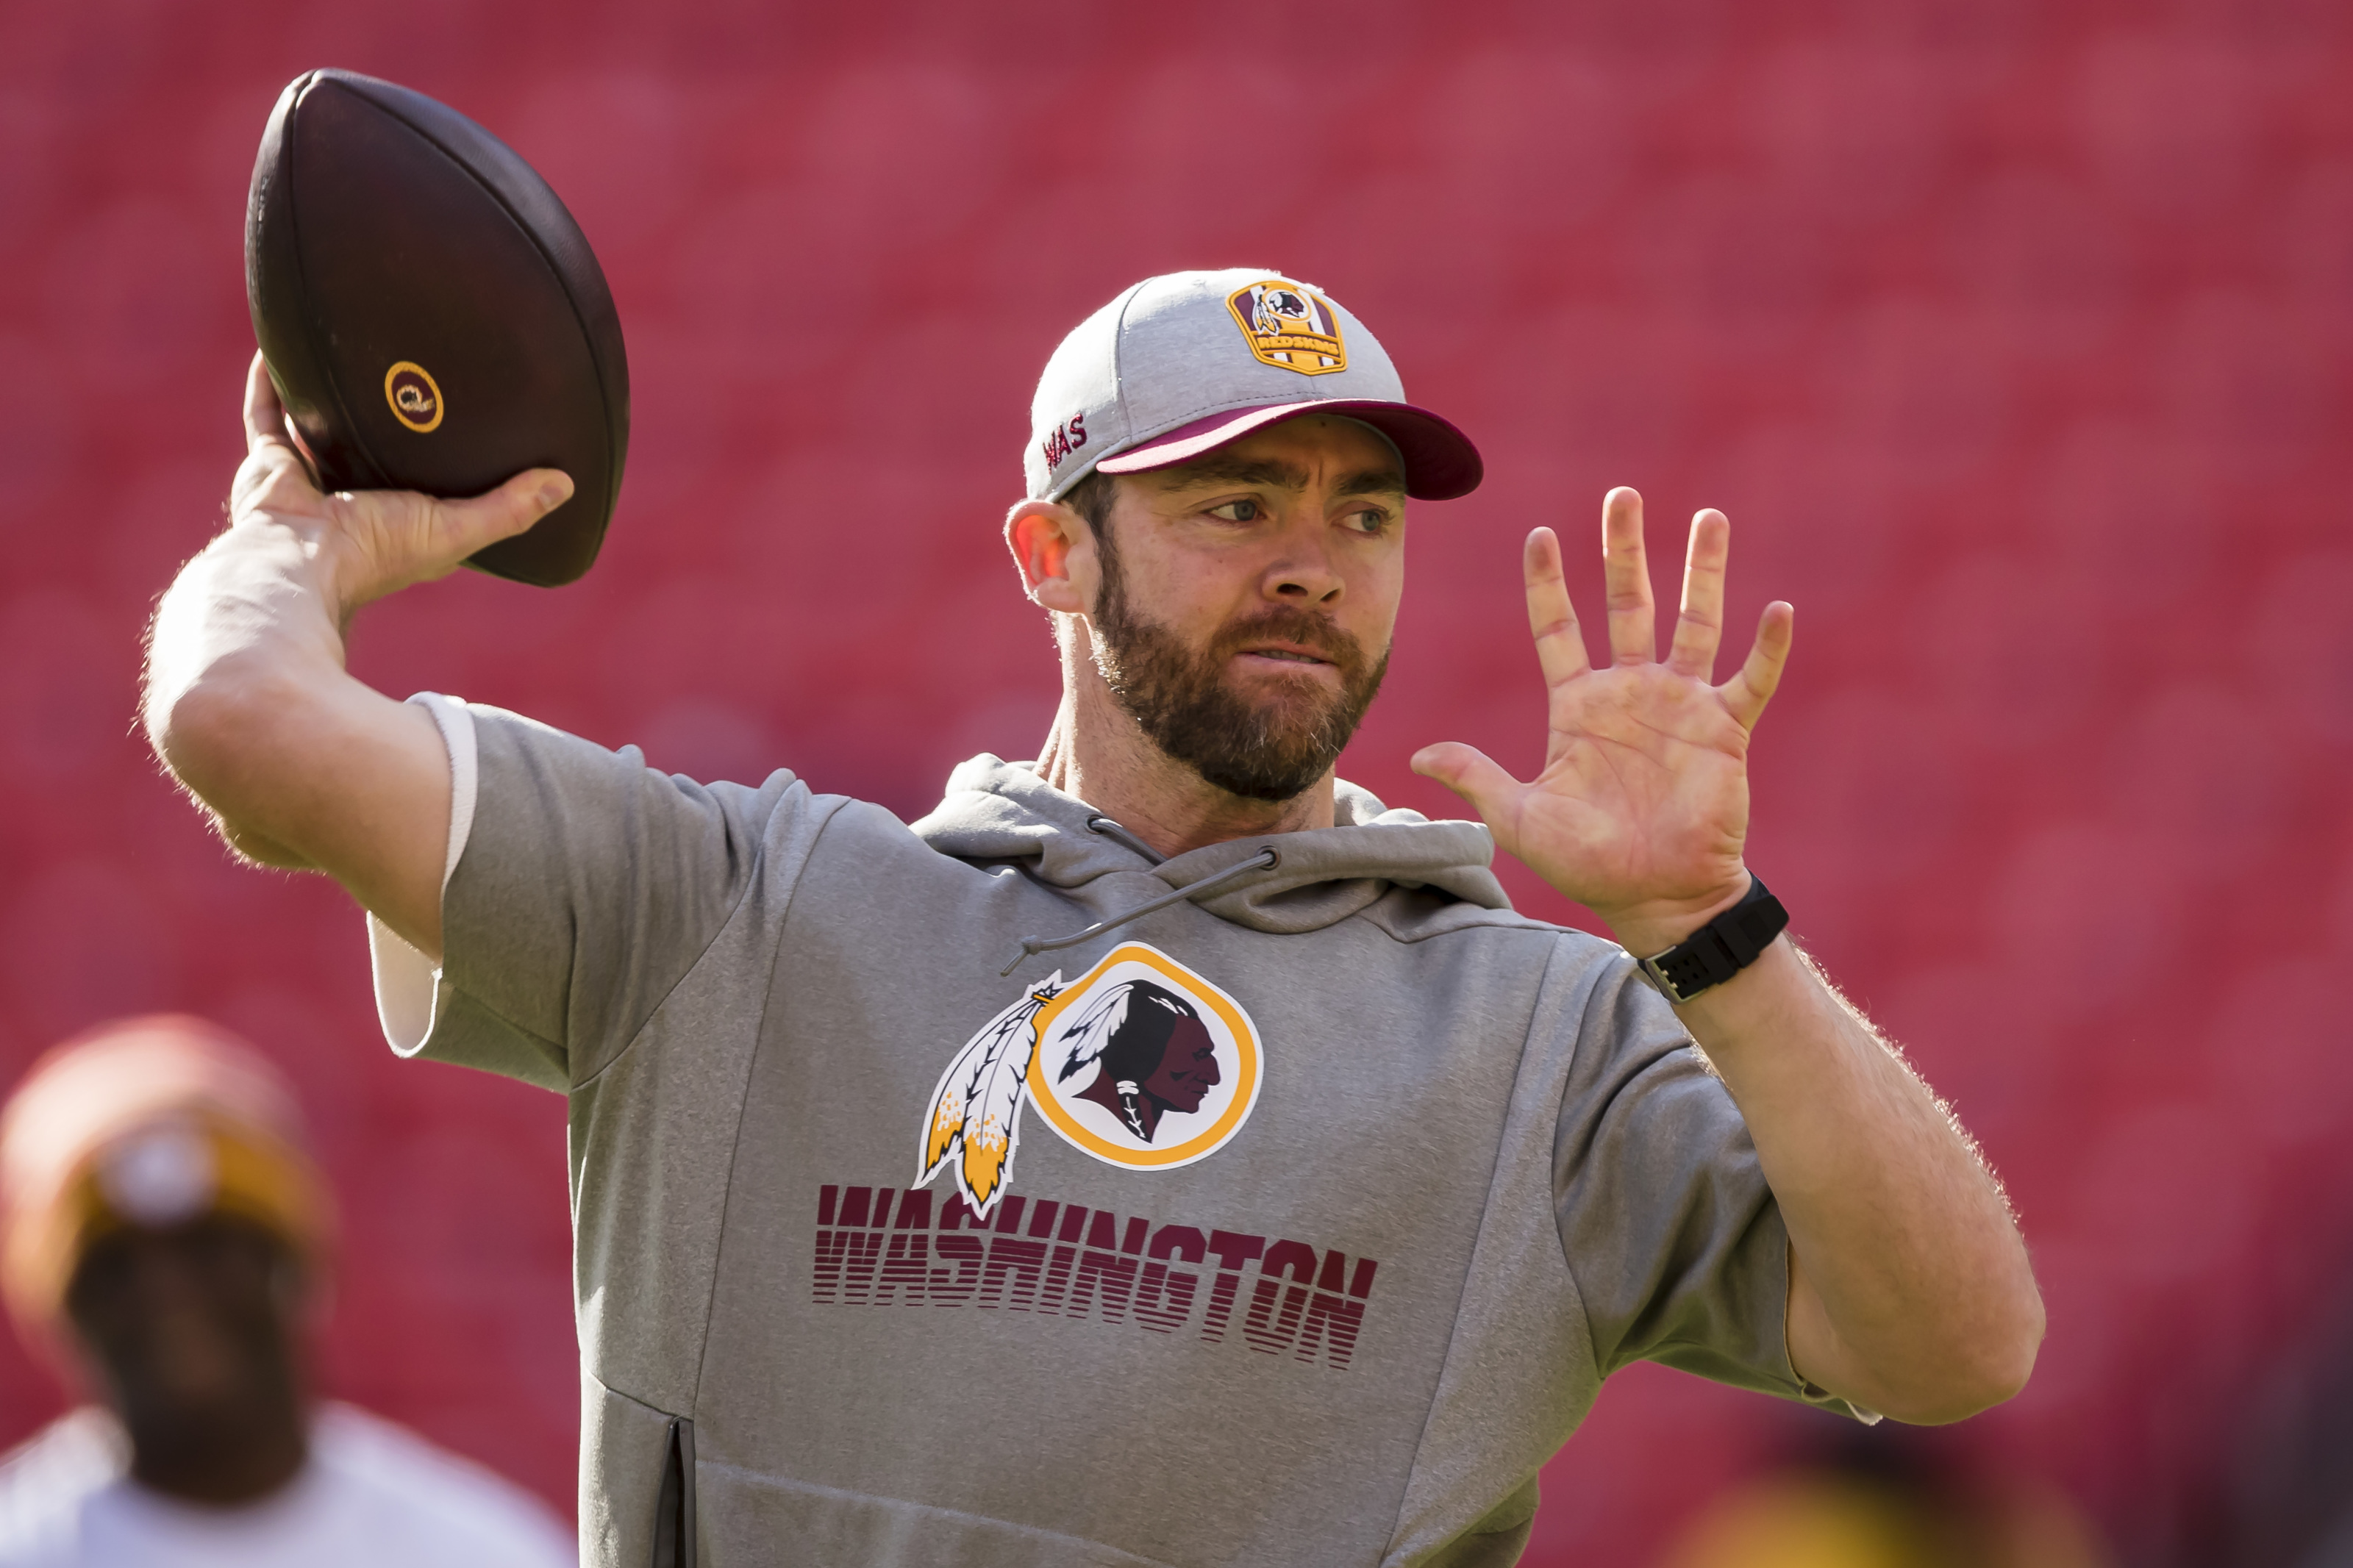 Texas Football: Why Colt McCoy to the Giants could work out well